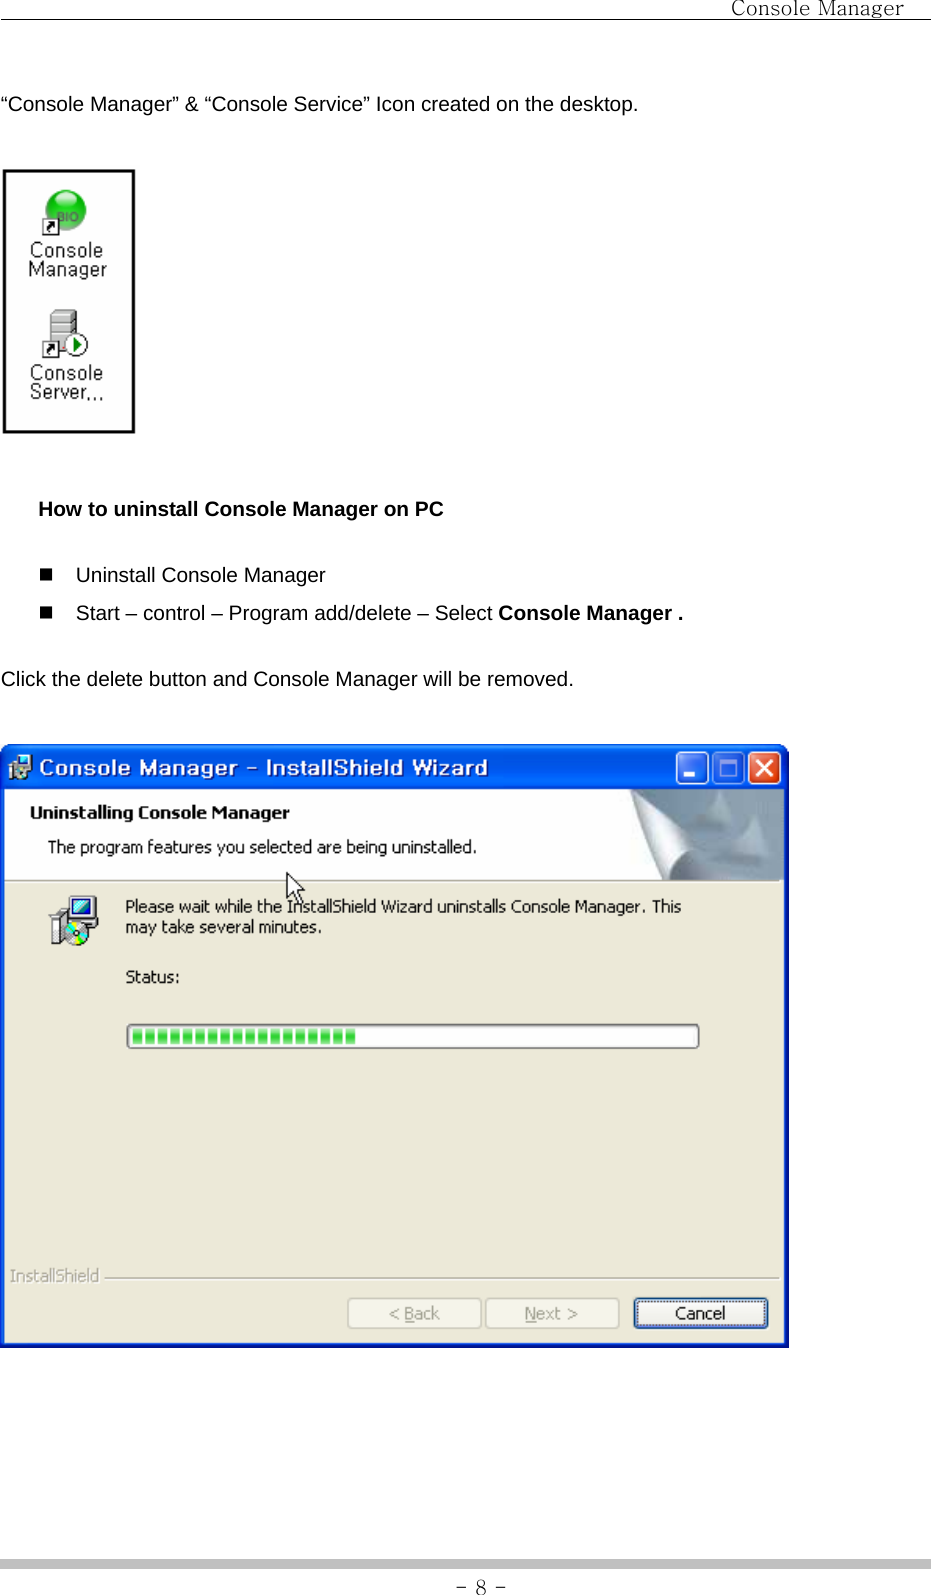                                Console Manager               - 8 -“Console Manager” &amp; “Console Service” Icon created on the desktop.    How to uninstall Console Manager on PC   Uninstall Console Manager     Start – control – Program add/delete – Select Console Manager . Click the delete button and Console Manager will be removed.   